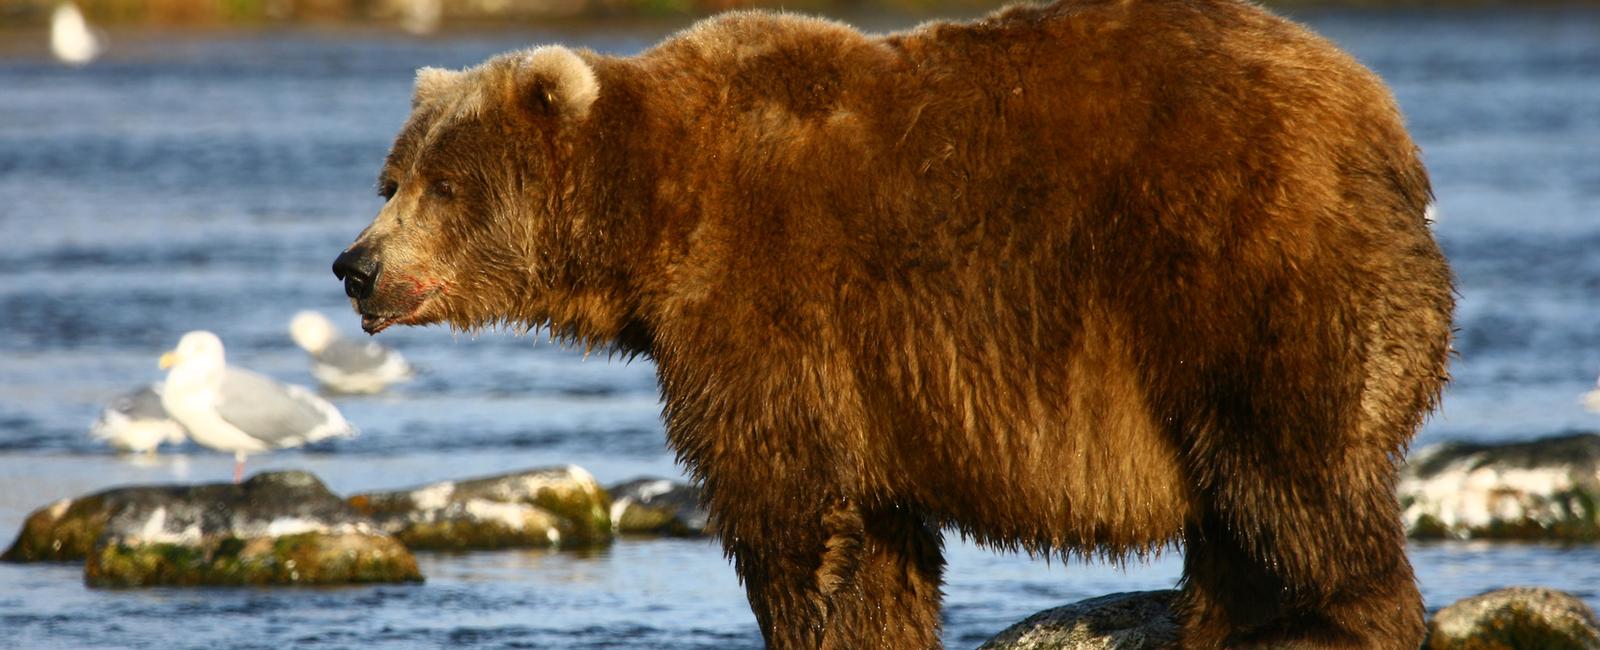 Kodiak island is 50 km away from the coast of alaska in the gulf of alaska and is home to the world s largest brown bear the kodiak bear